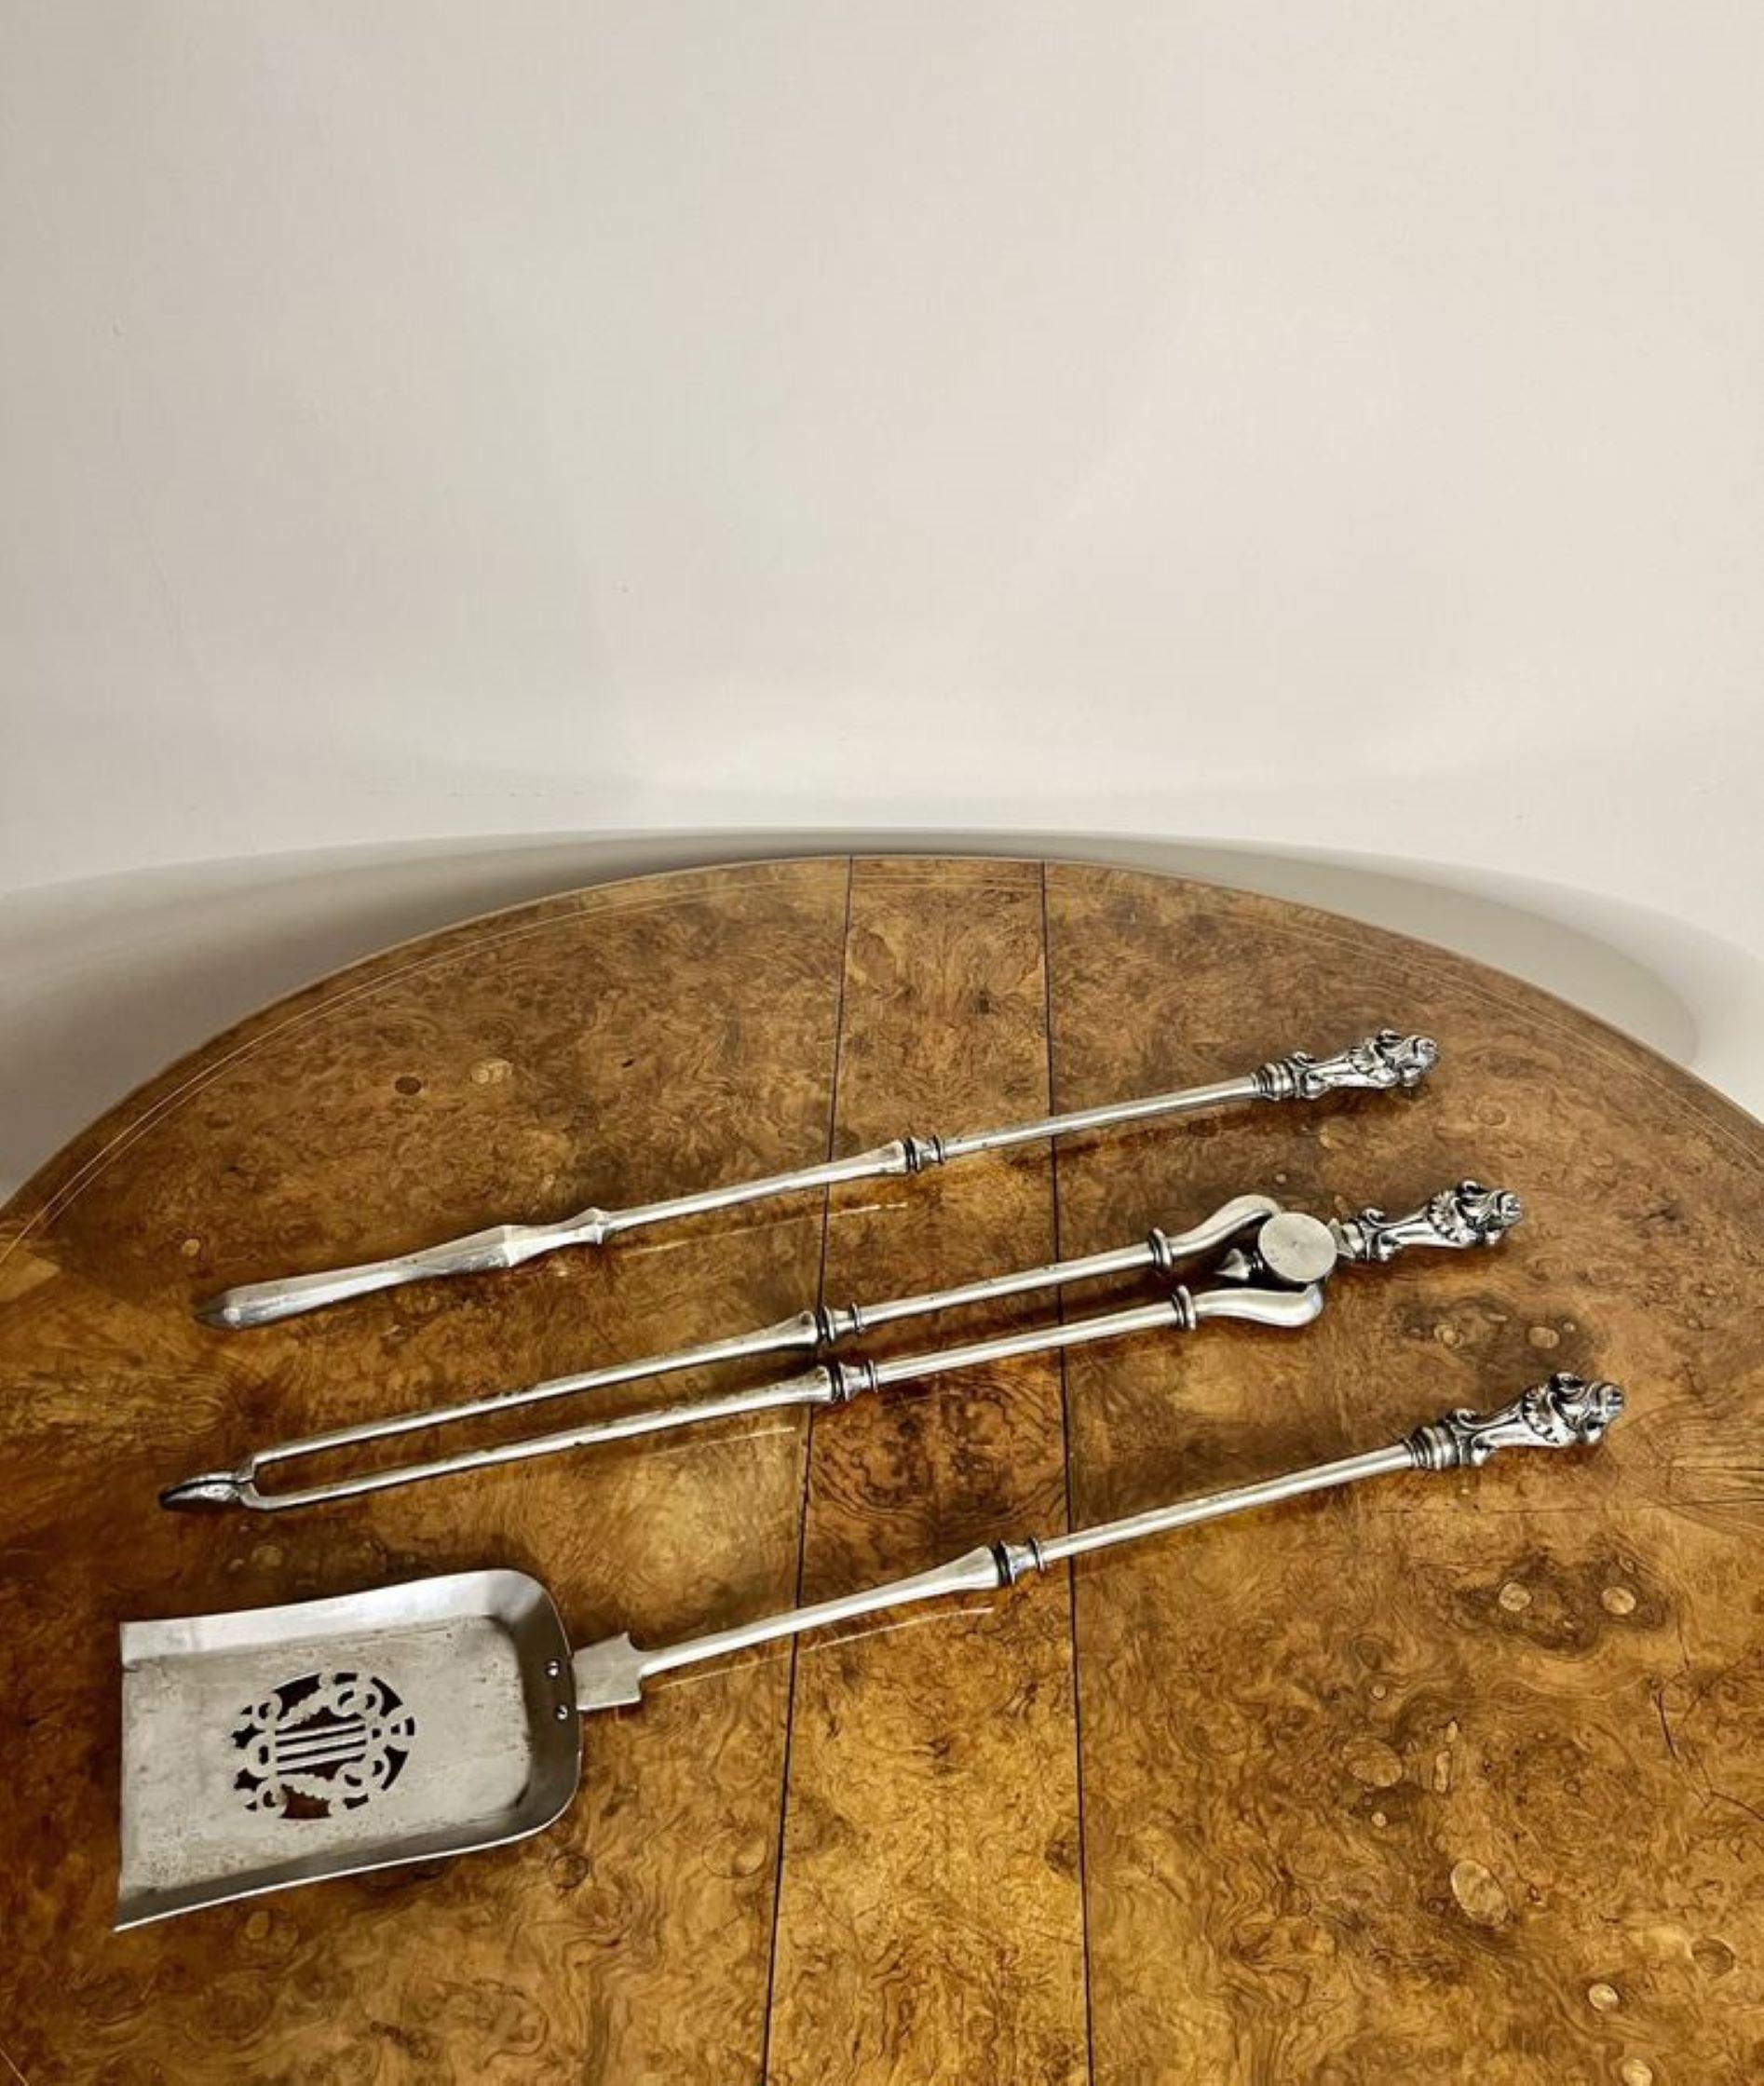 Quality set of antique George III steels fire irons having a quality set o fire irons consisting of a shovel, poker and a set of tongs with quality ornate detailed handles.

D. 1800